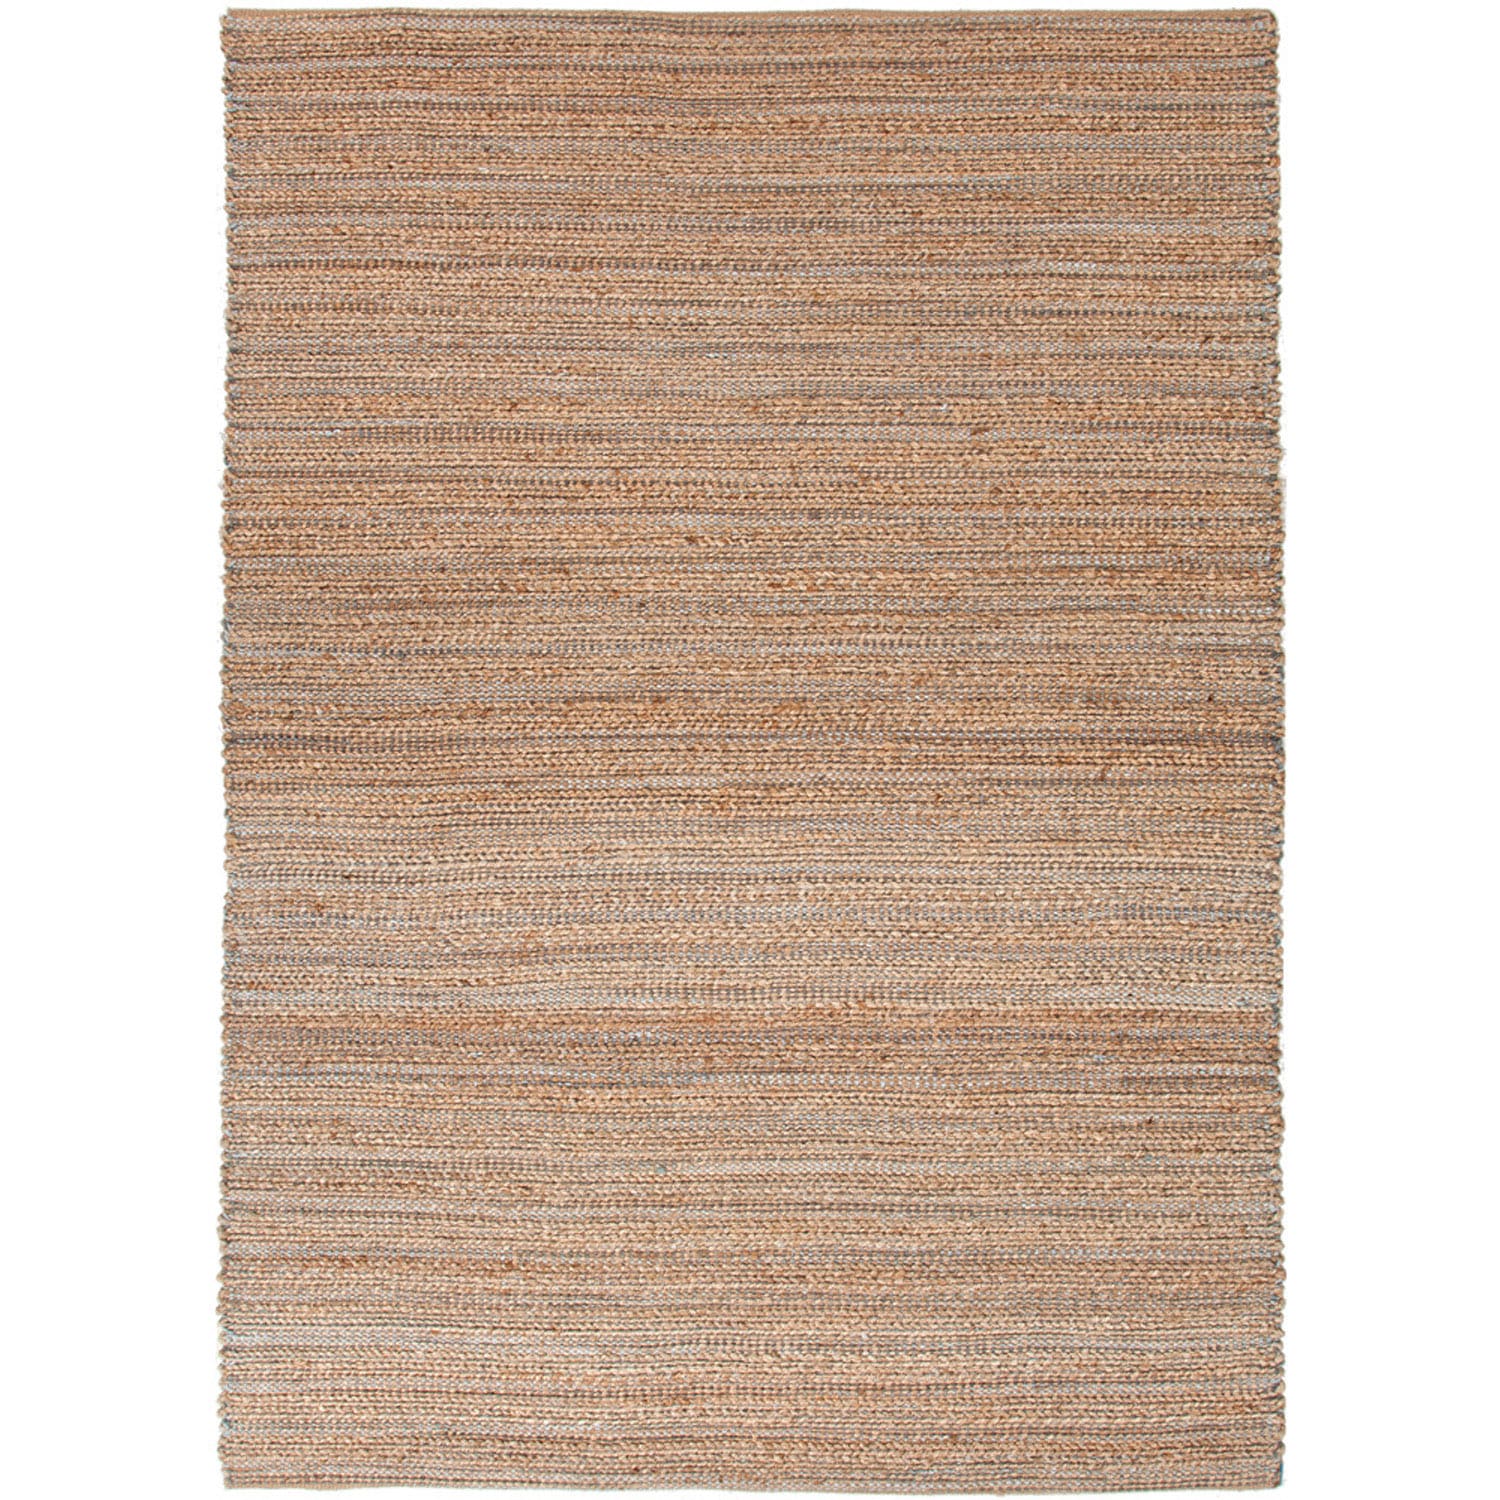 Handmade Naturals Blue Solid pattern Area Rug (8 X 10)